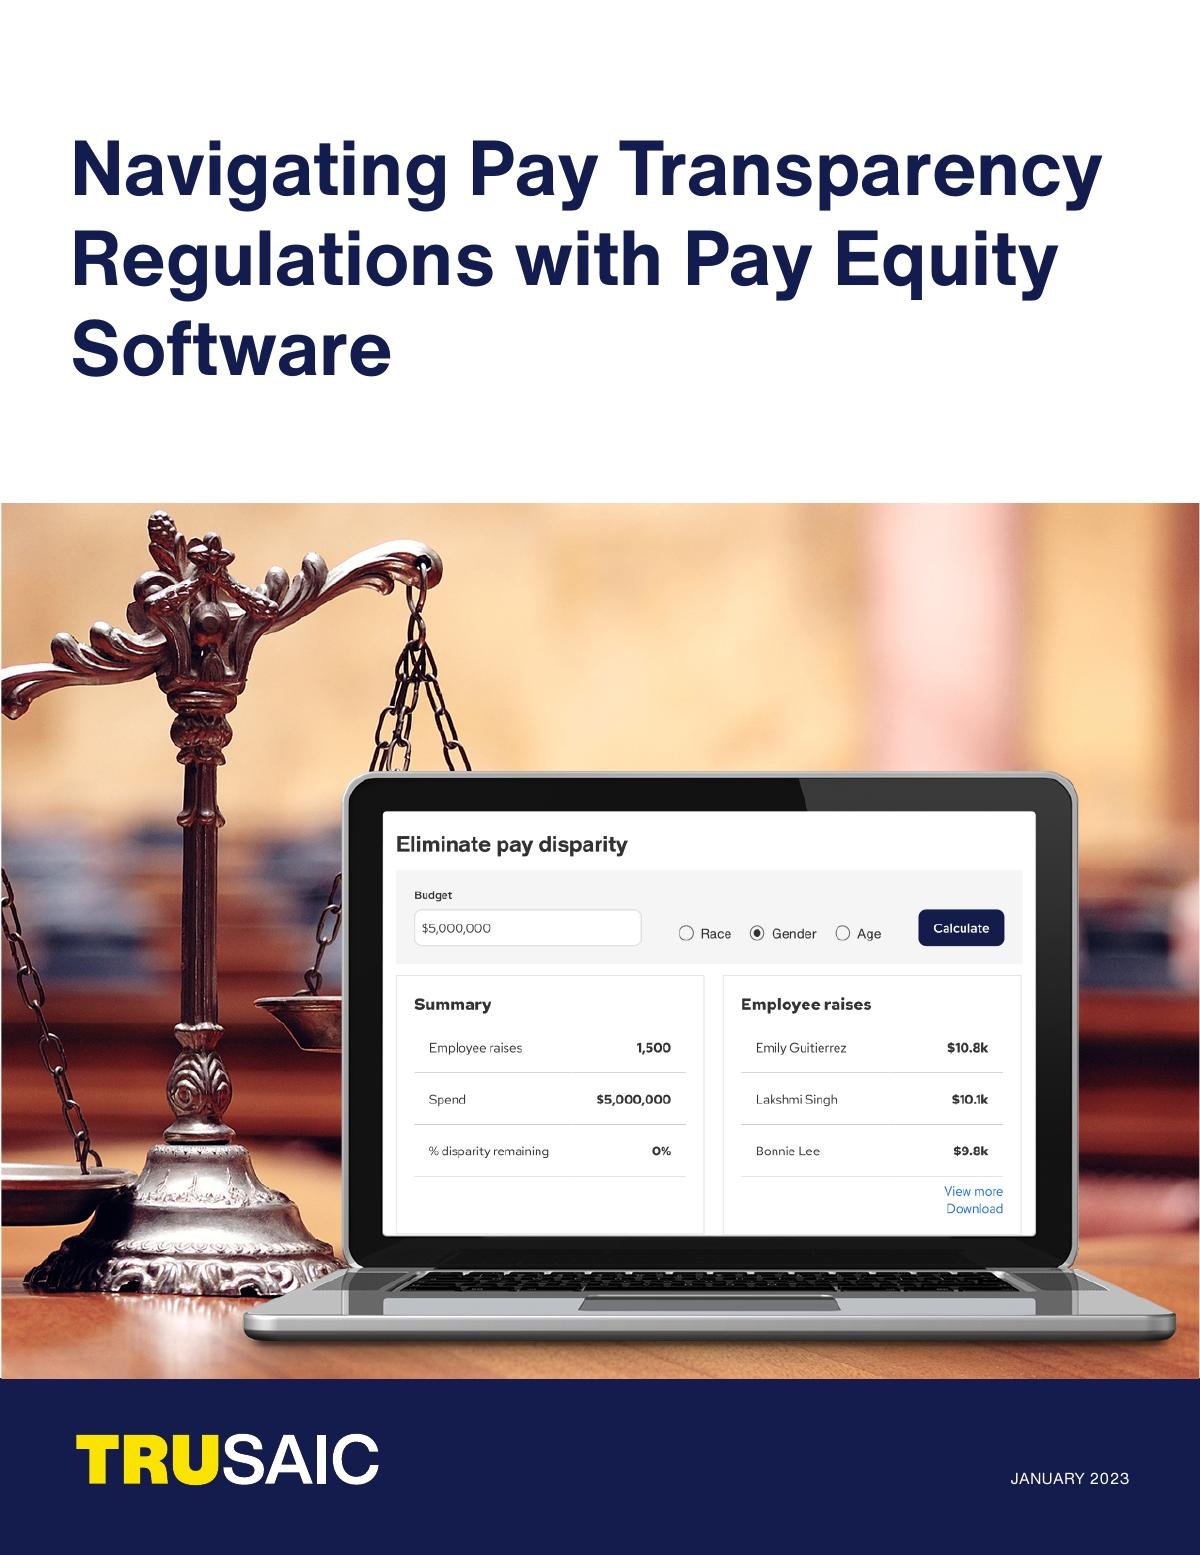 Navigating Pay Transparency Regulations with Pay Equity Software